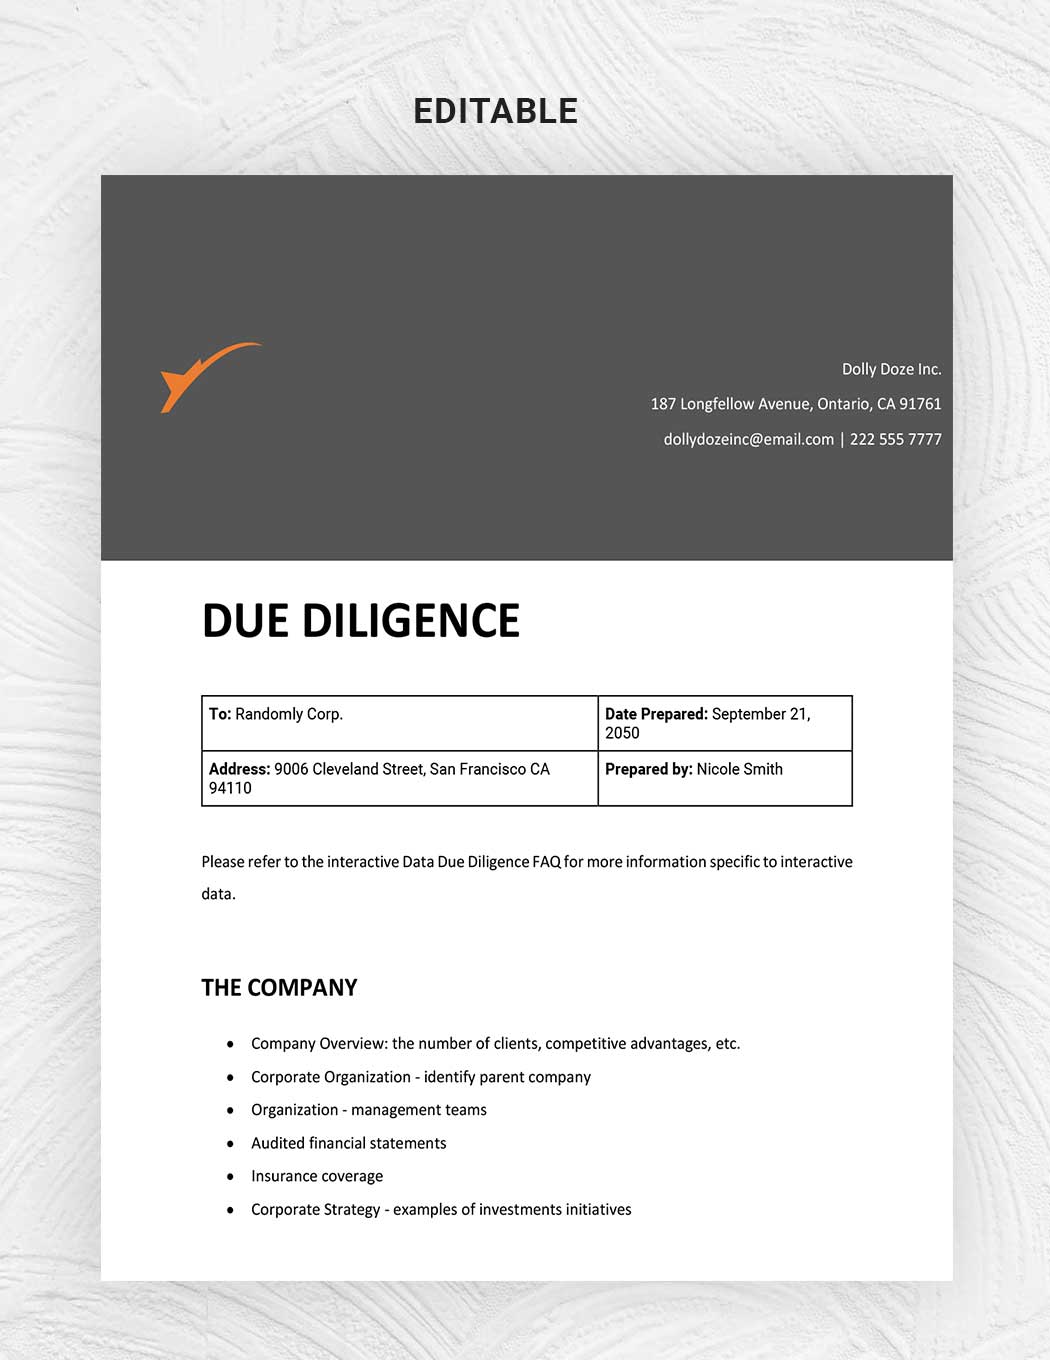 Due Diligence 